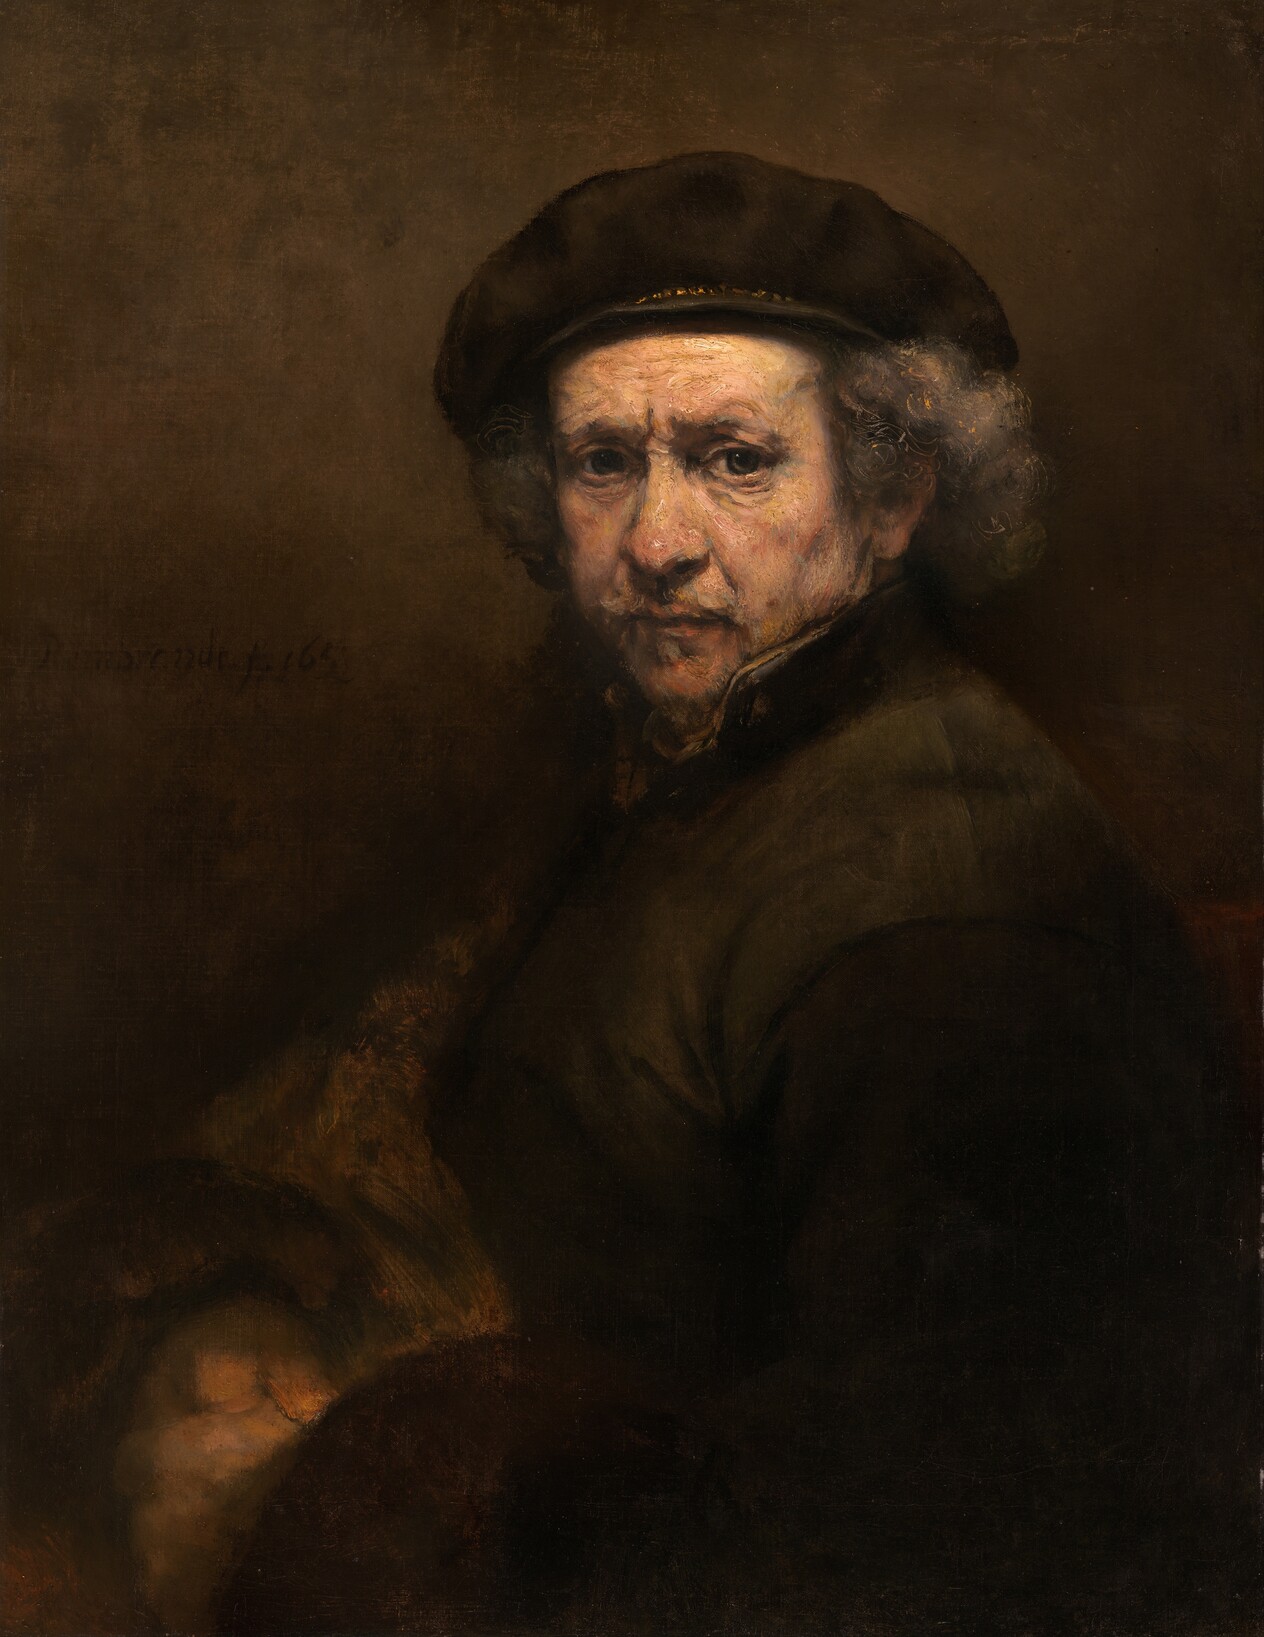 A depiction of the artist wearing a beret with his collar turned up